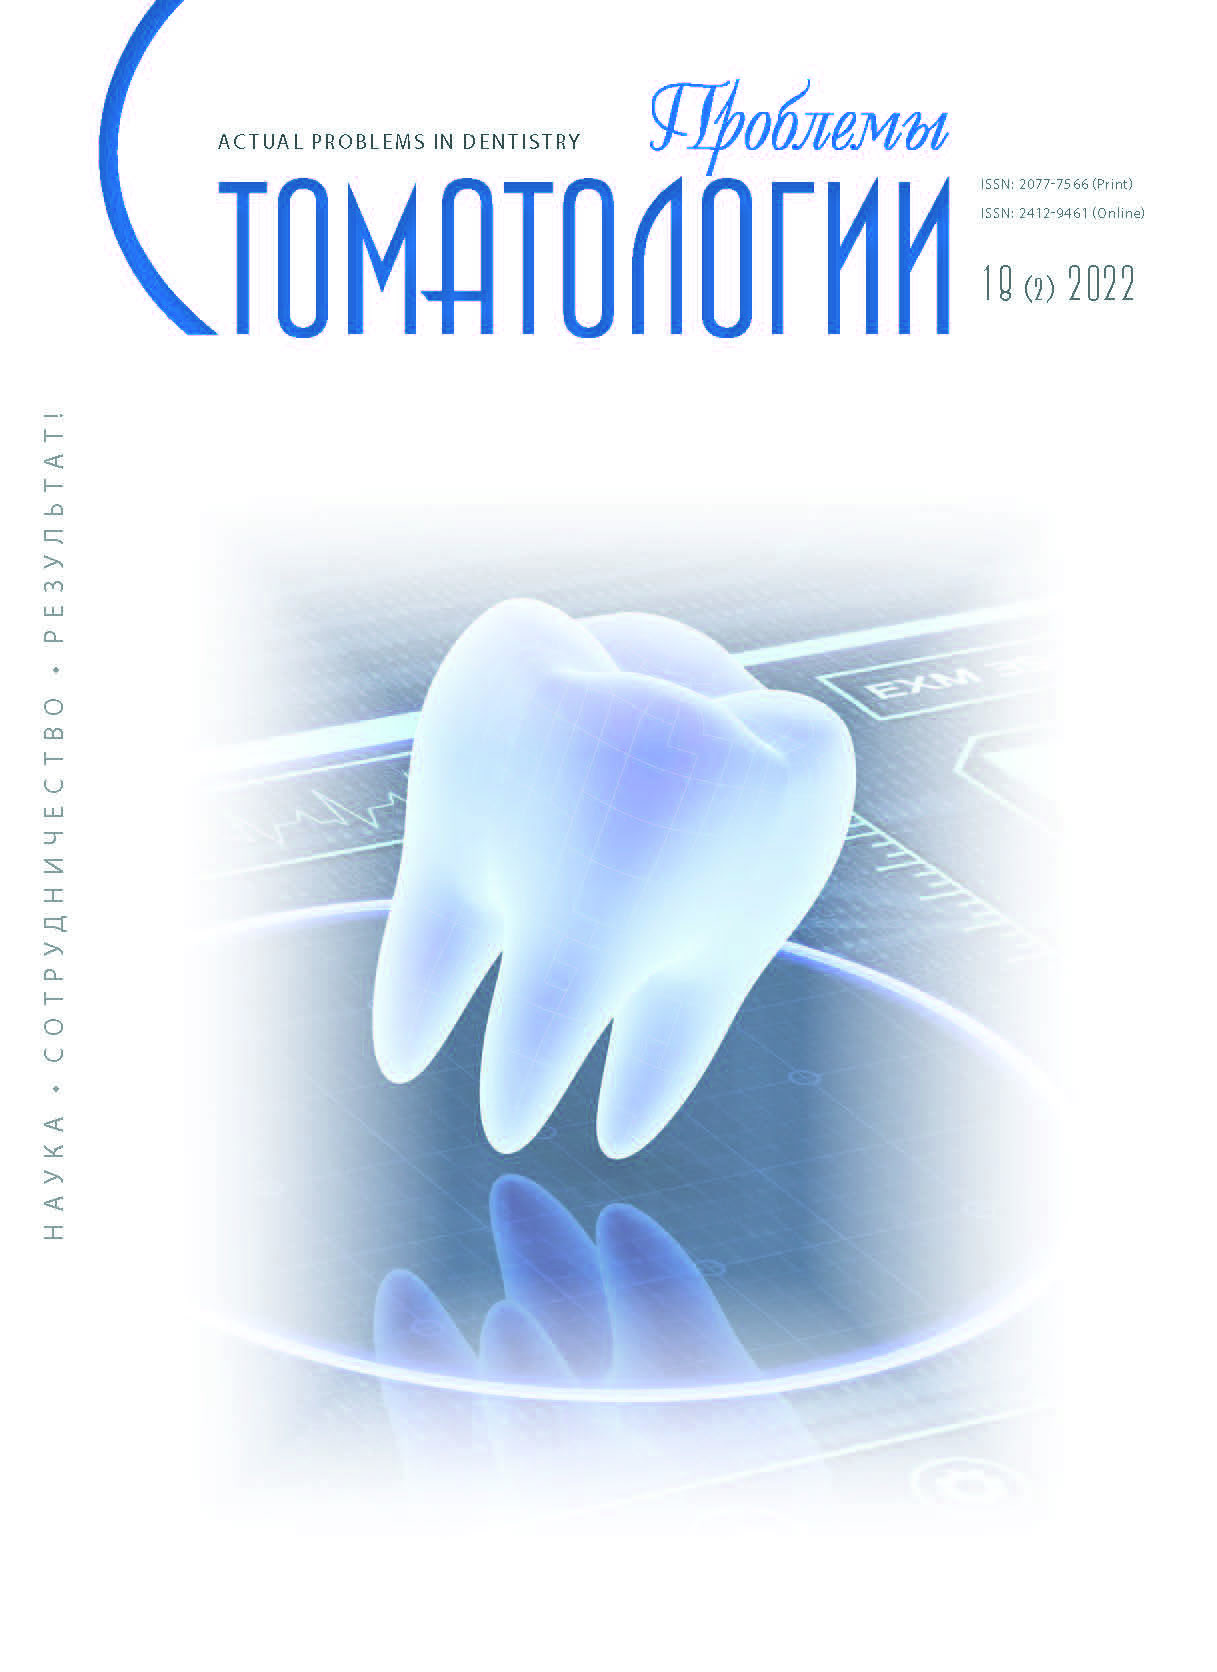                         COMPARISON OF CONE BEAM COMPUTED TOMOGRAPHY DATA IN PATIENTS WITH INTRAARTICULAR PATHOLOGY OF THE TEMPOROMANDIBULAR JOINT WITH THE PRESENCE AND ABSENCE OF FACIAL ASYMMETRY
            